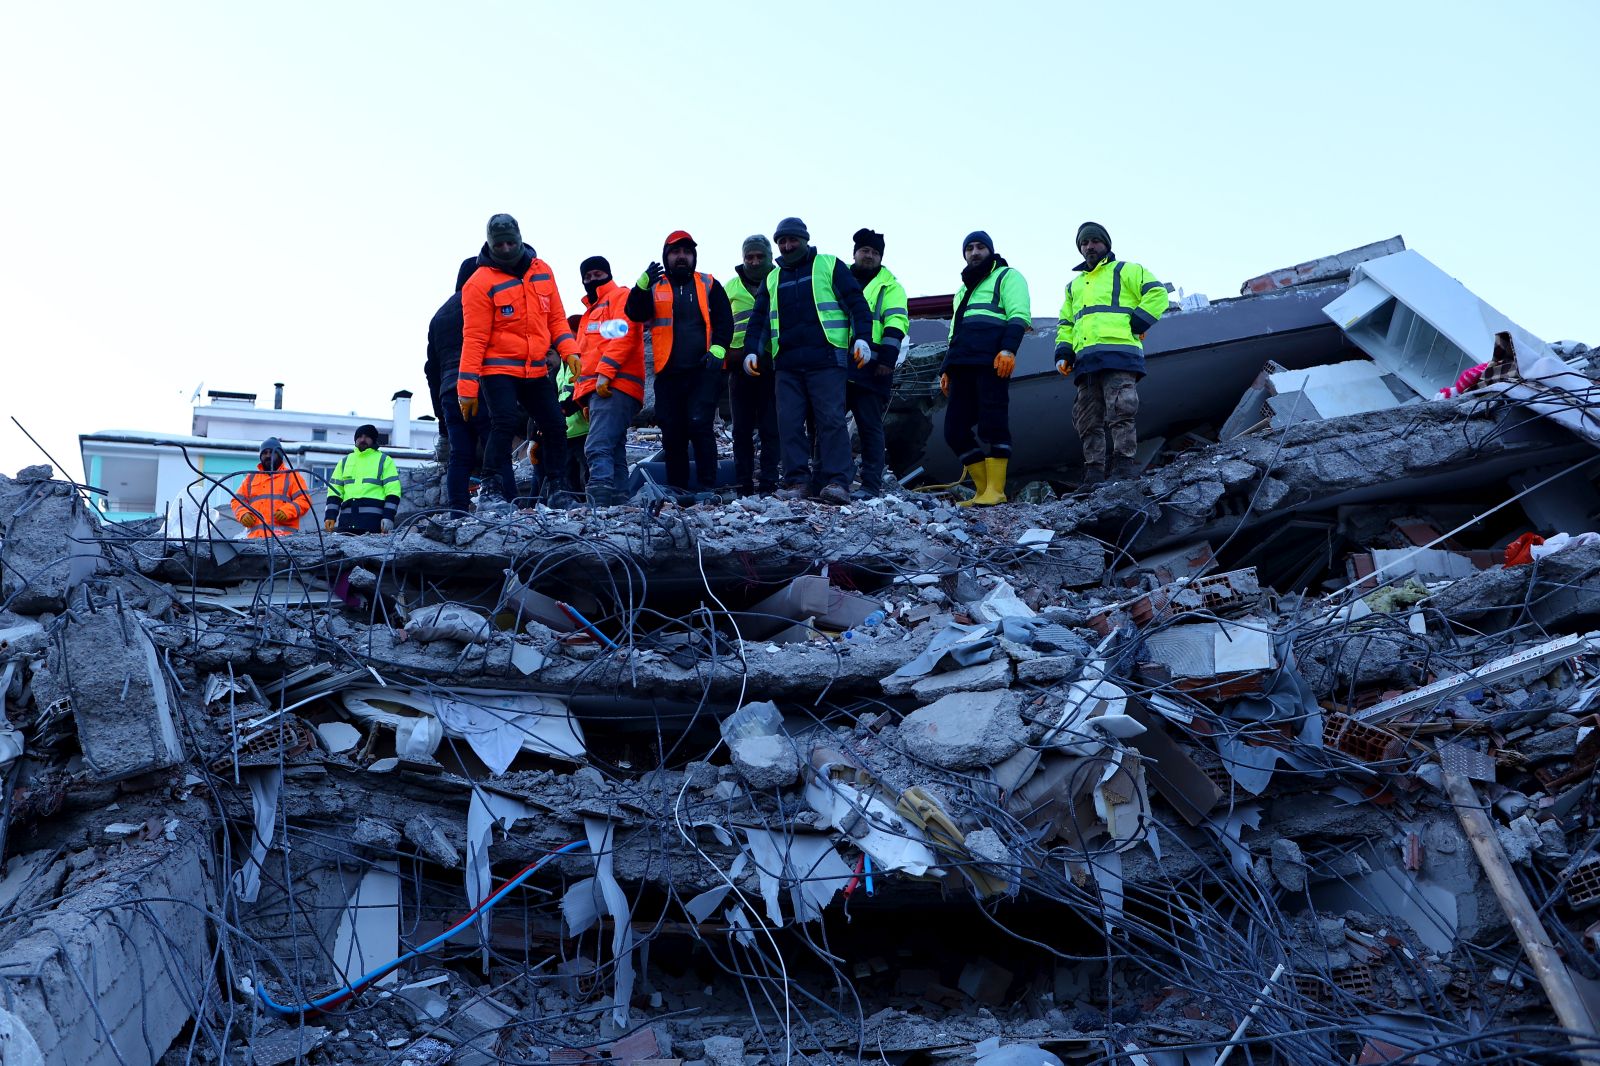 epa10457364 Emergency personnel and locals search for victims at the site of a collapsed building in the aftermath of a powerful earthquake in the Elbistan district of Kahramanmaras, southeastern Turkey, 09 February 2023. More than 17,000 people have died and thousands more are injured after two major earthquakes struck southern Turkey and northern Syria on 06 February. Authorities fear the death toll will keep climbing as rescuers look for survivors across the region.  EPA/SEDAT SUNA